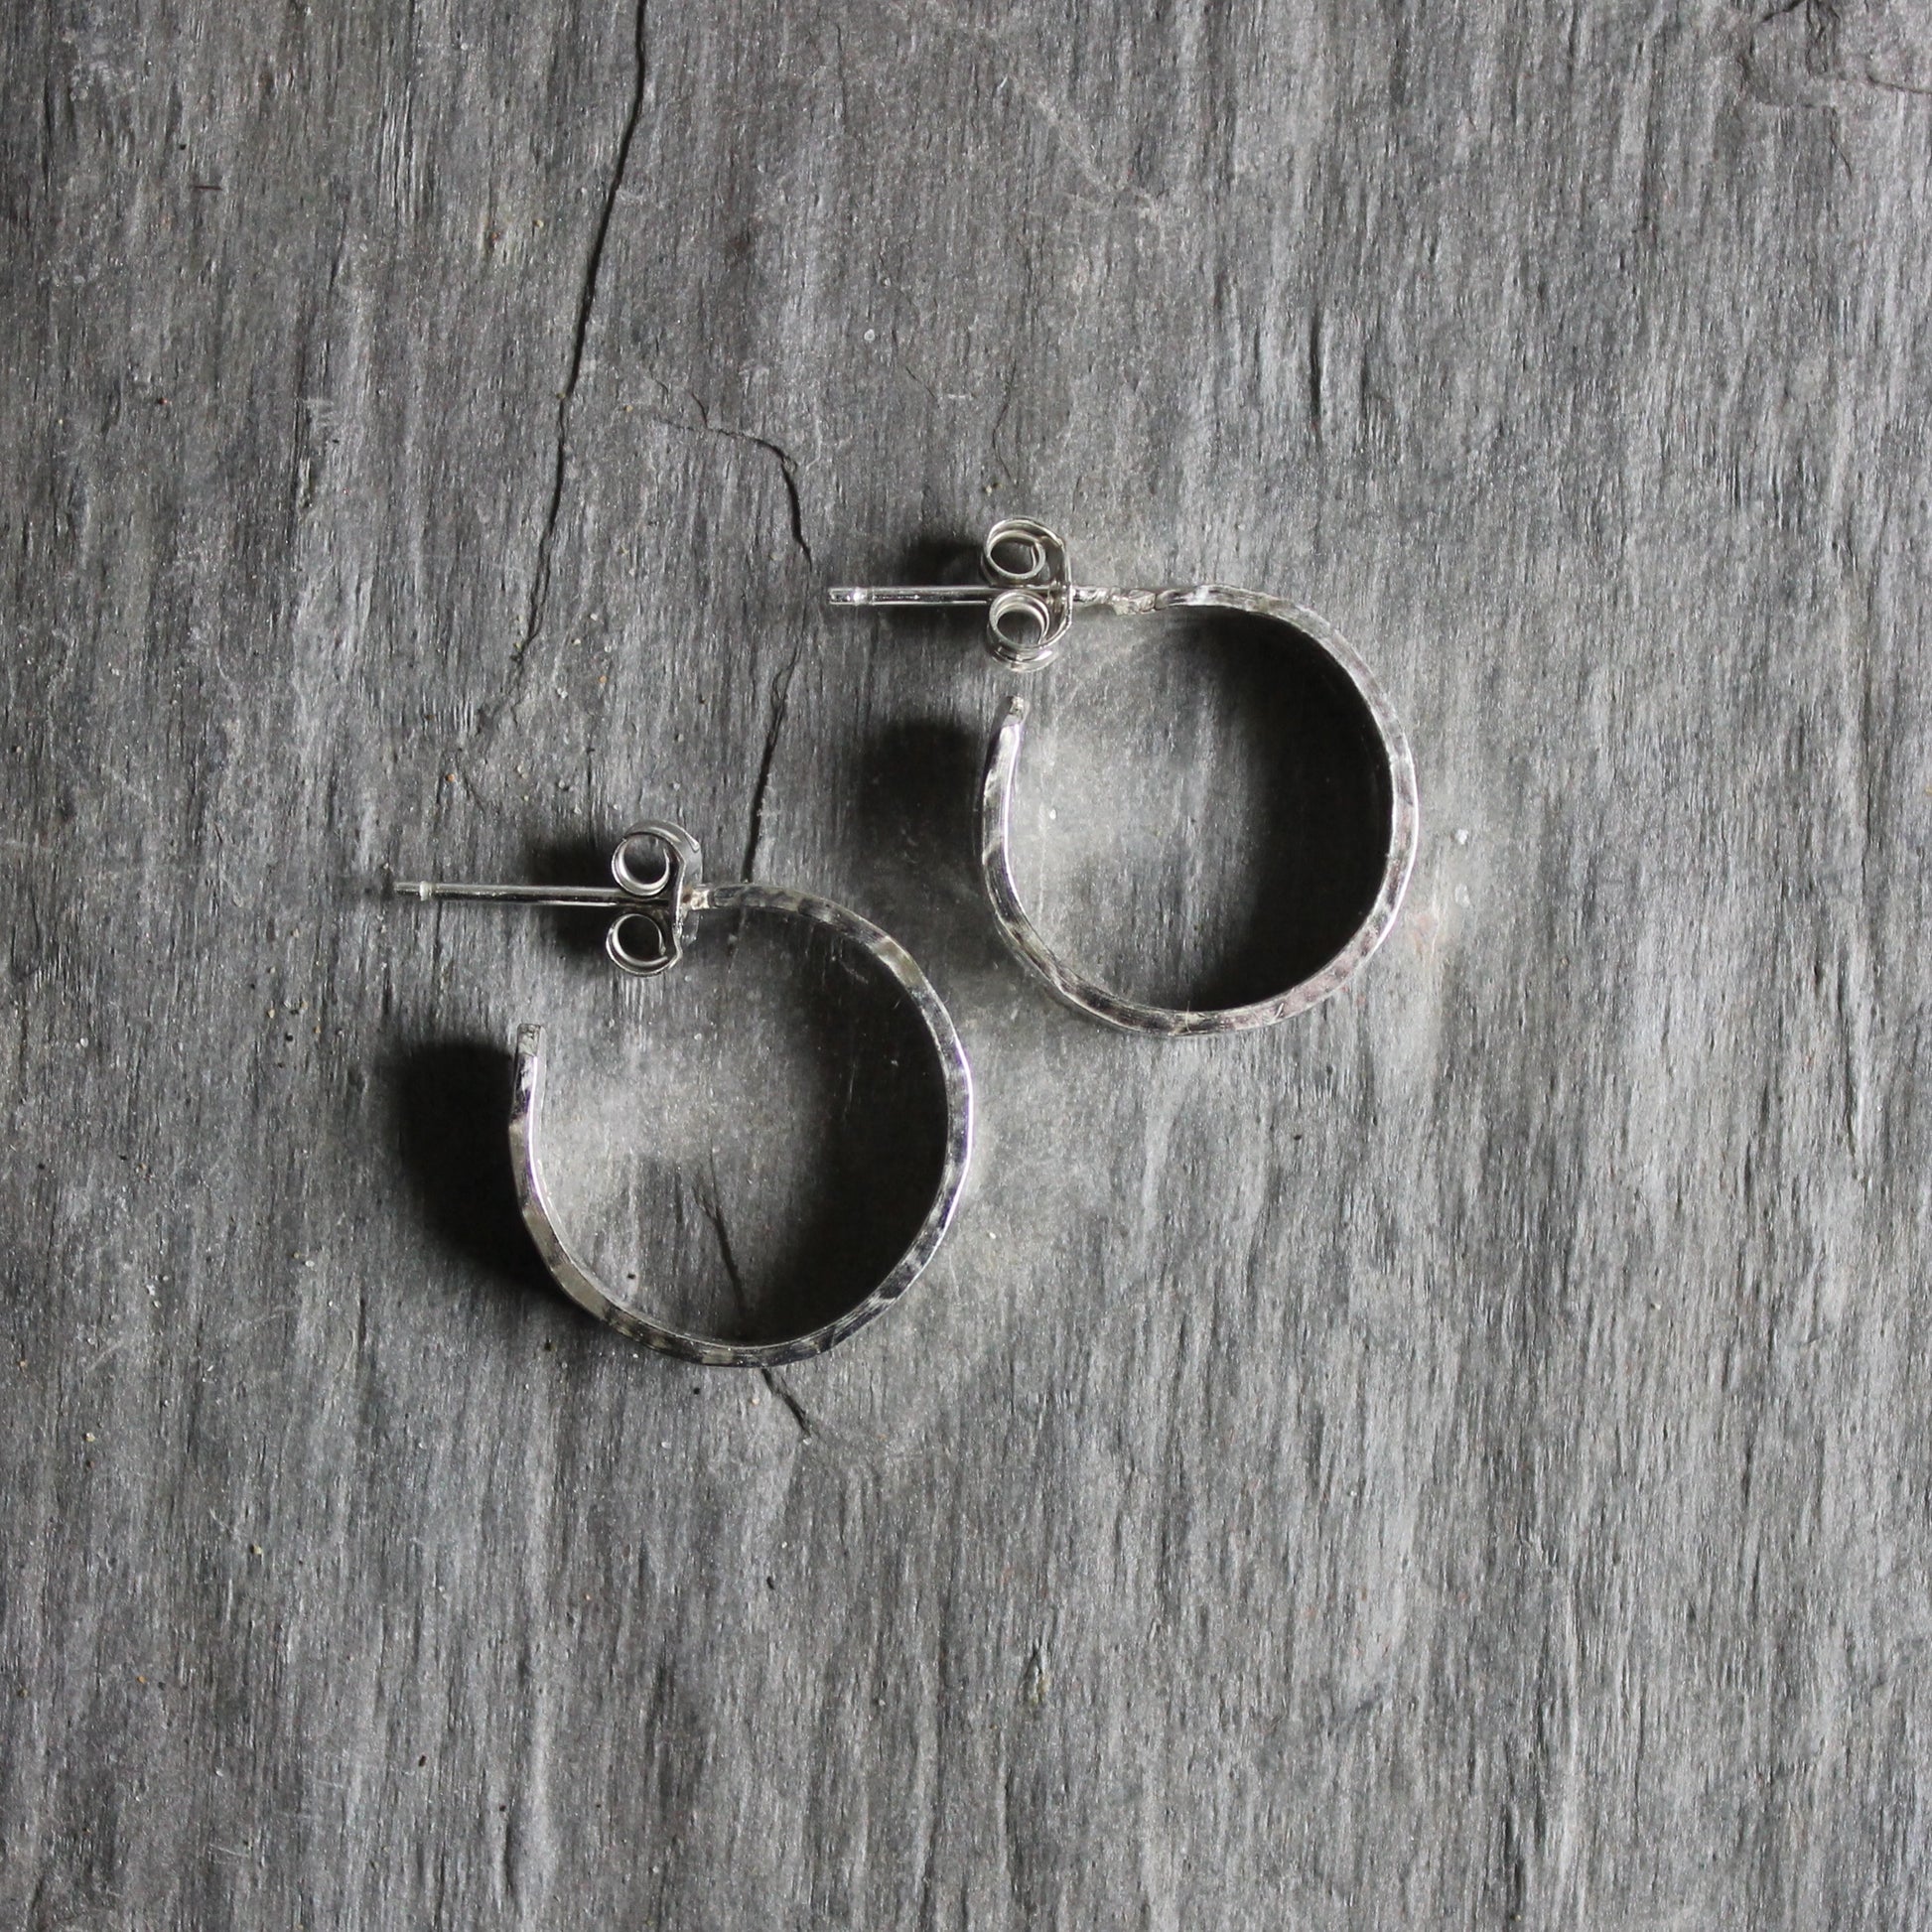 these hoop earrings are made with 4mm x 1mm sterling silver and hammered into approximately 3/4 inch diameter hoop earrings with silver posts. 